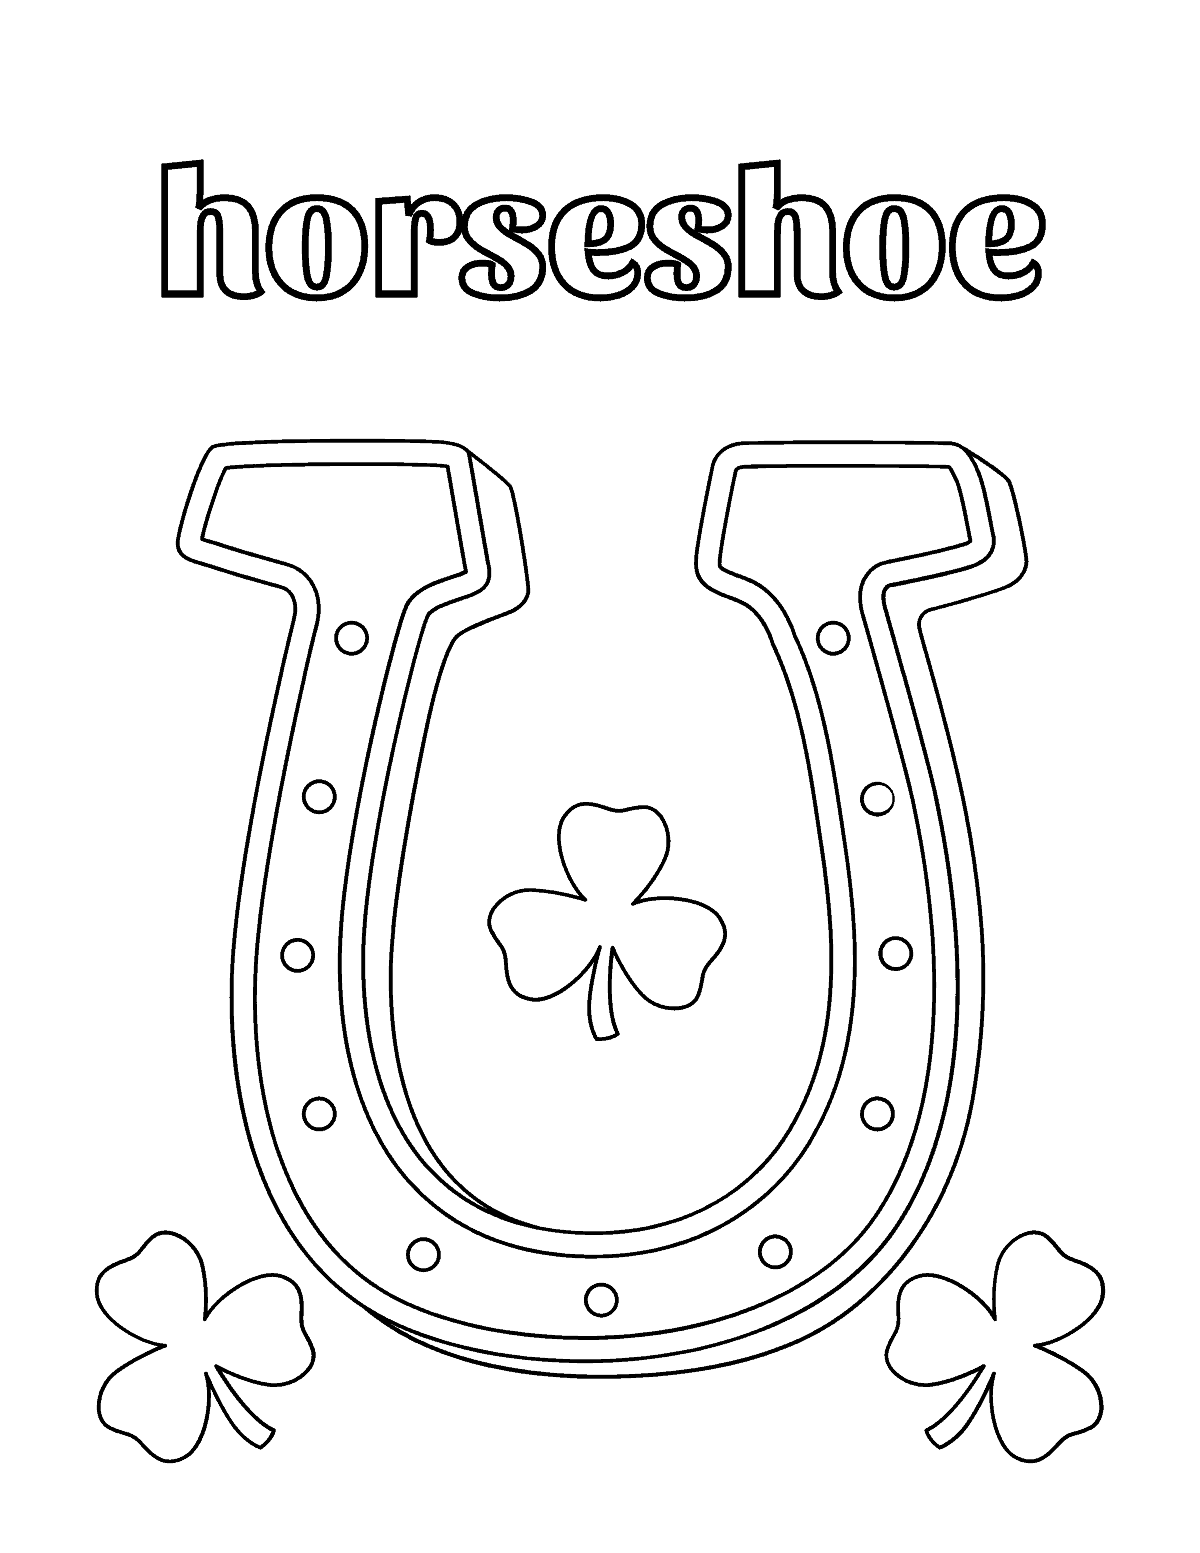 Lucky Horseshoe Free Printable Coloring Page